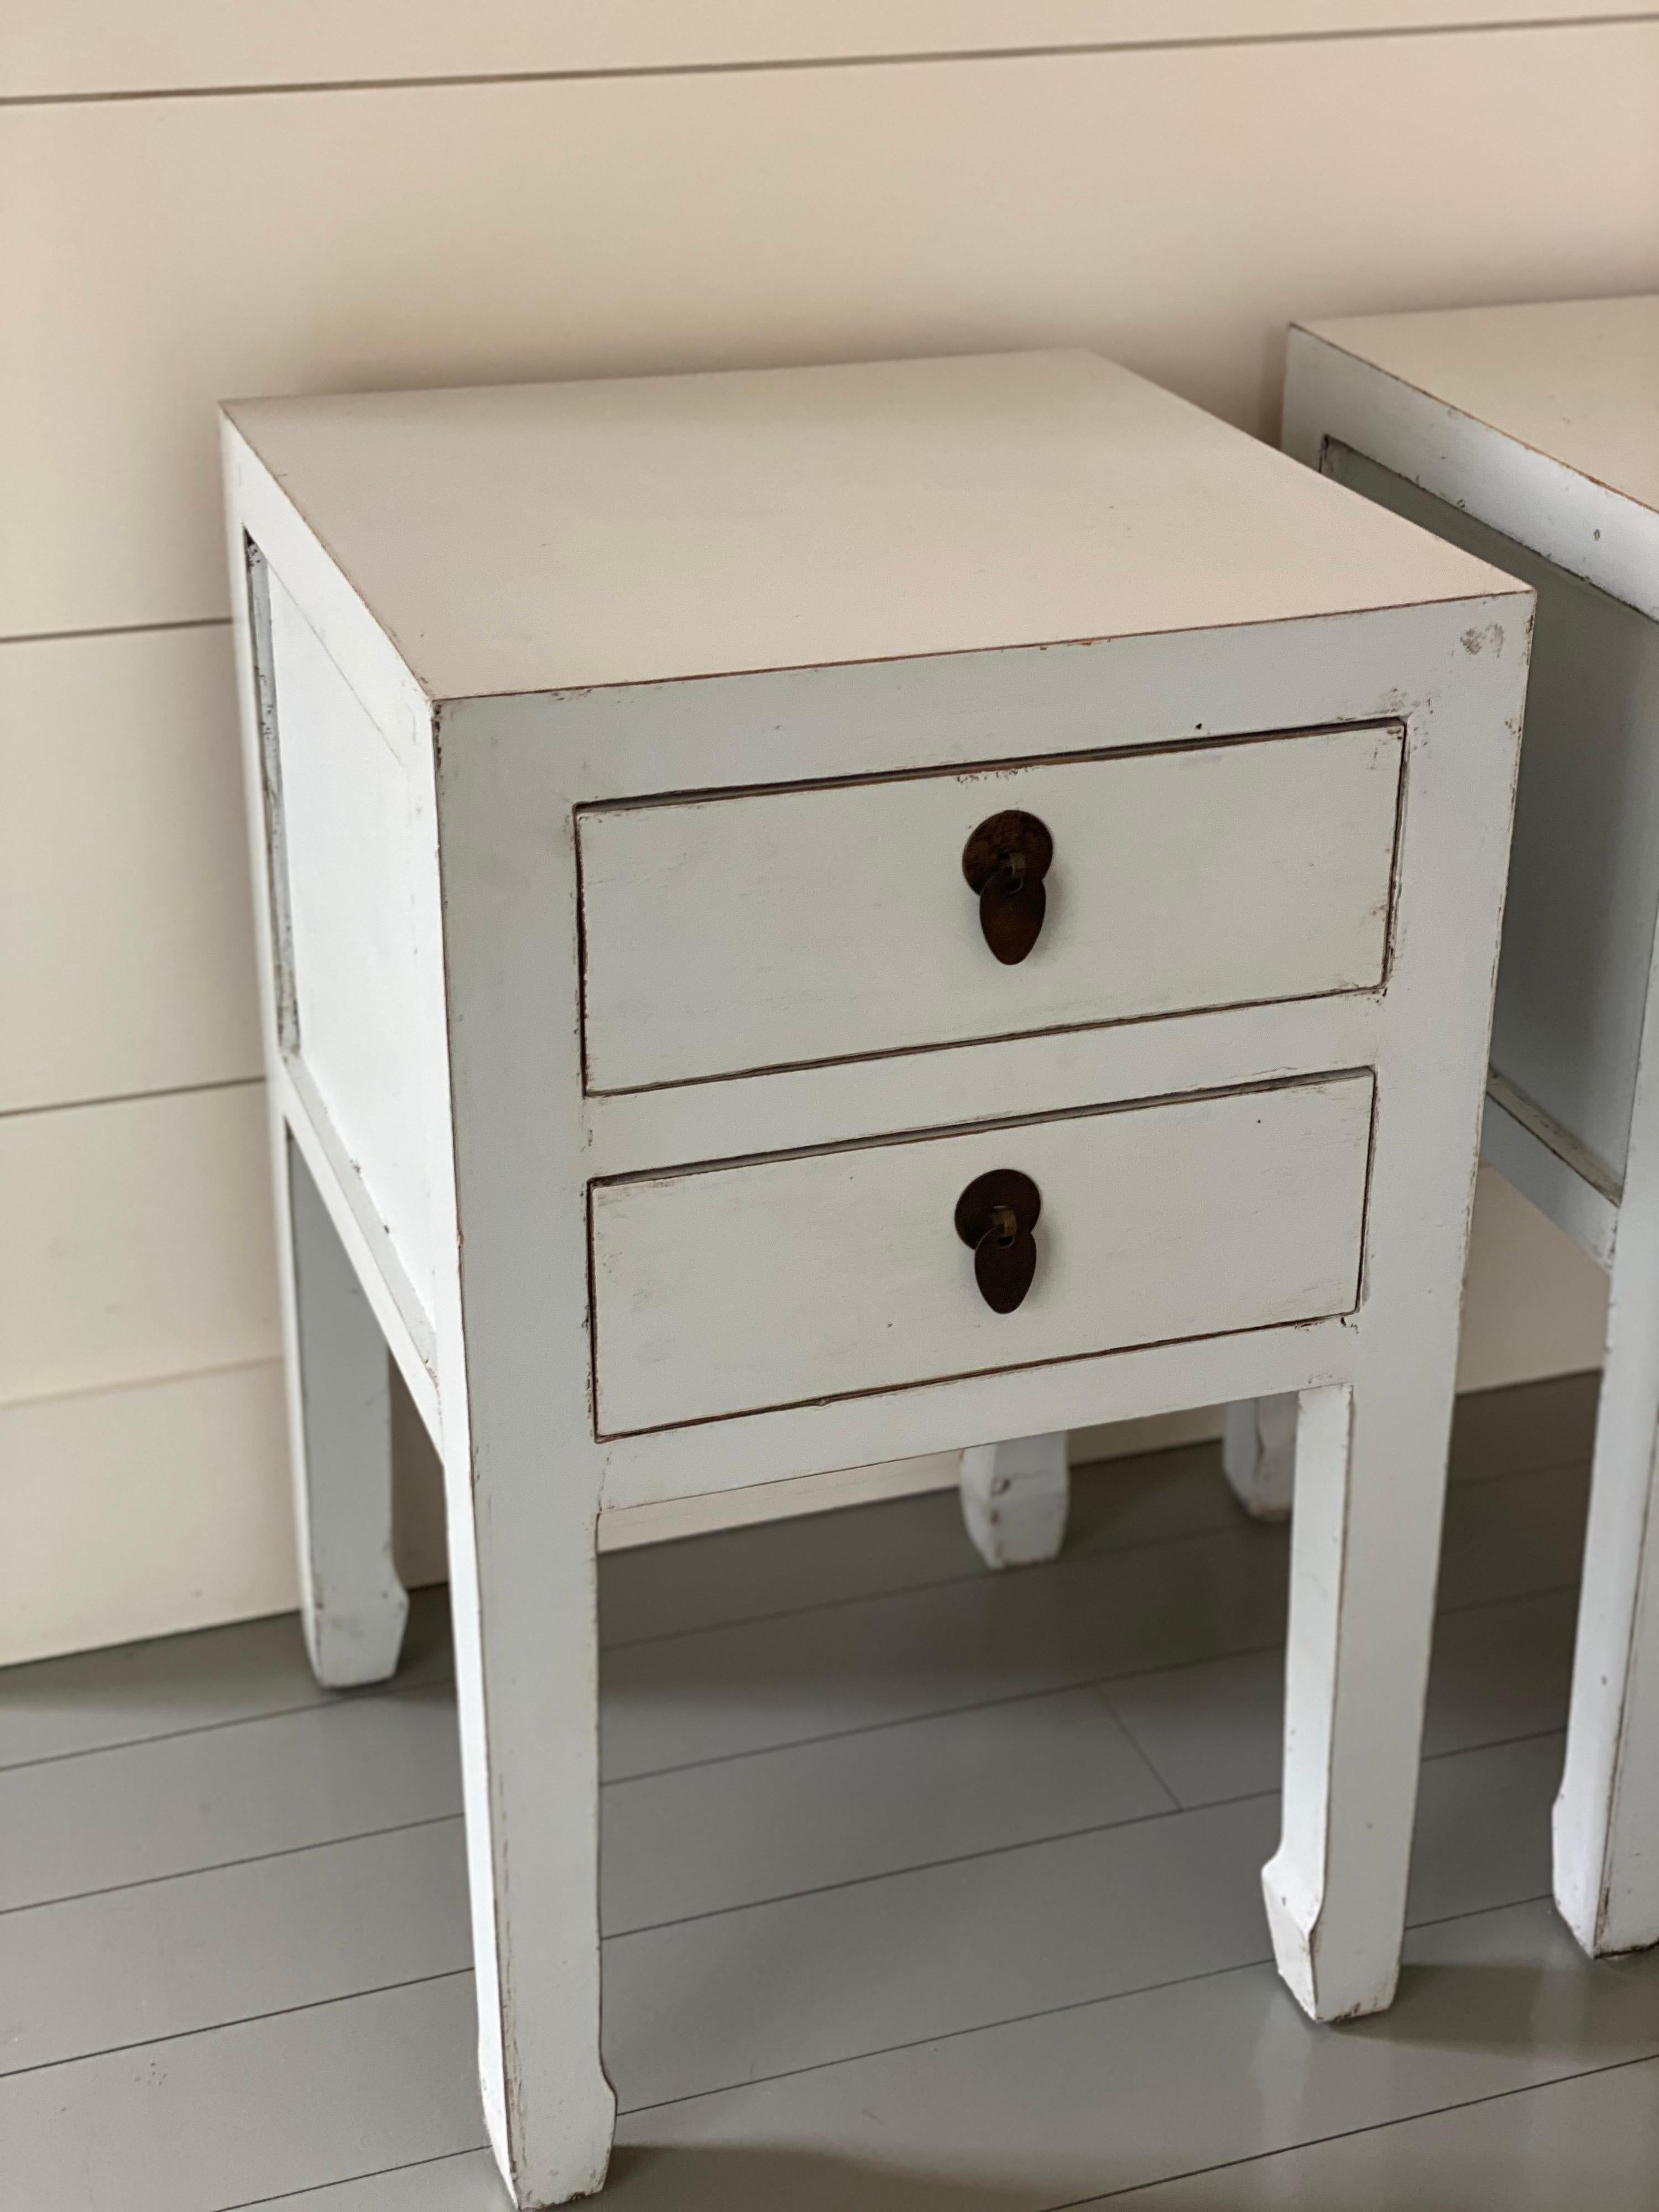 Pair of white painted two drawer Chinese style end tables
Two drawers

Expected wear to finish. Overall good condition.

Measurements: 
Width: 15.75 in
Depth: 14 6/8 in
Height: 24 in.